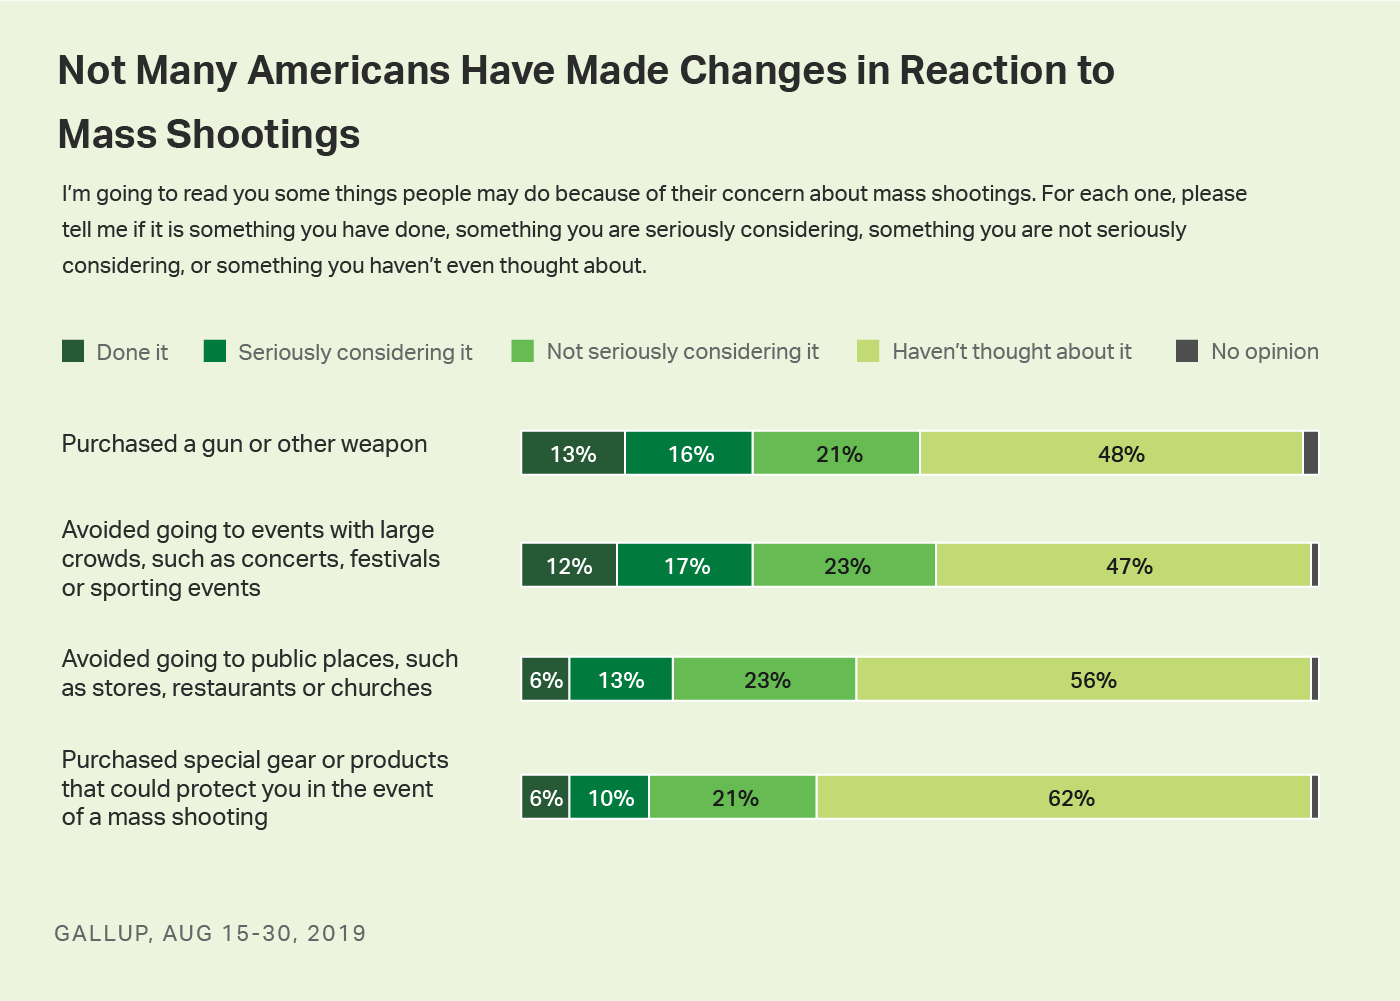 Bar charts. Results for four actions Americans might take because of their concern about mass shootings.